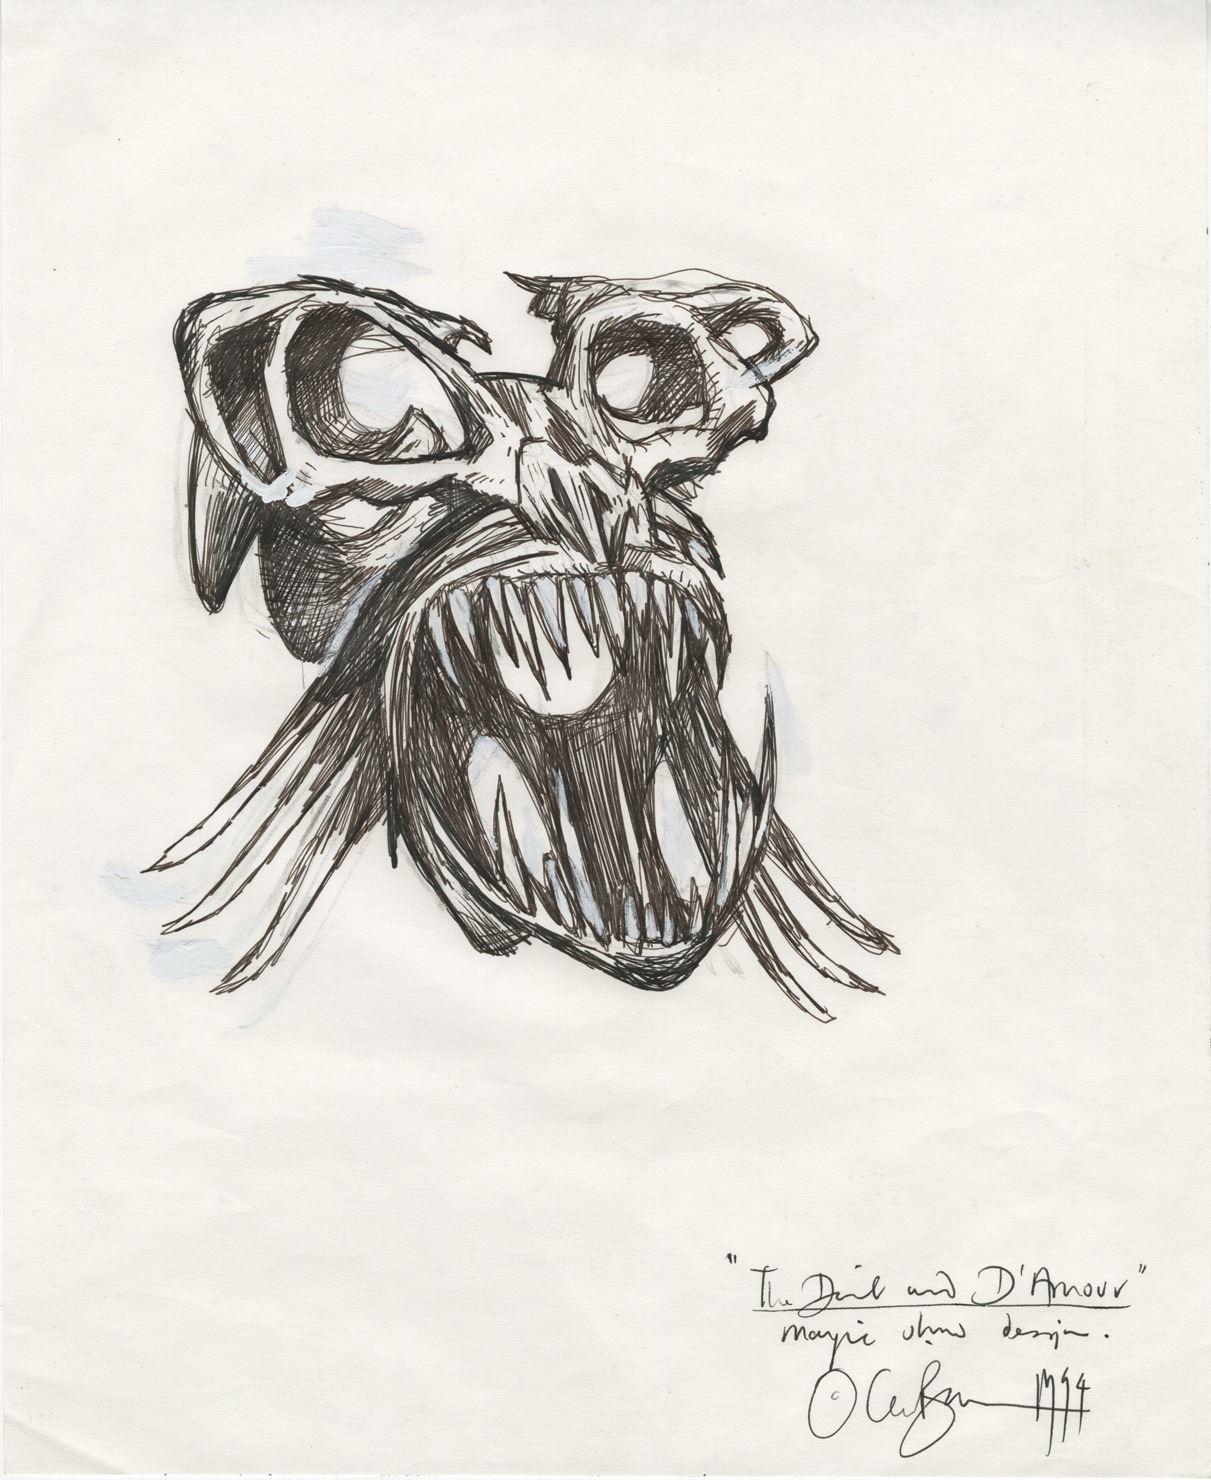 Clive Barker Sketches at PaintingValley.com | Explore collection of ...